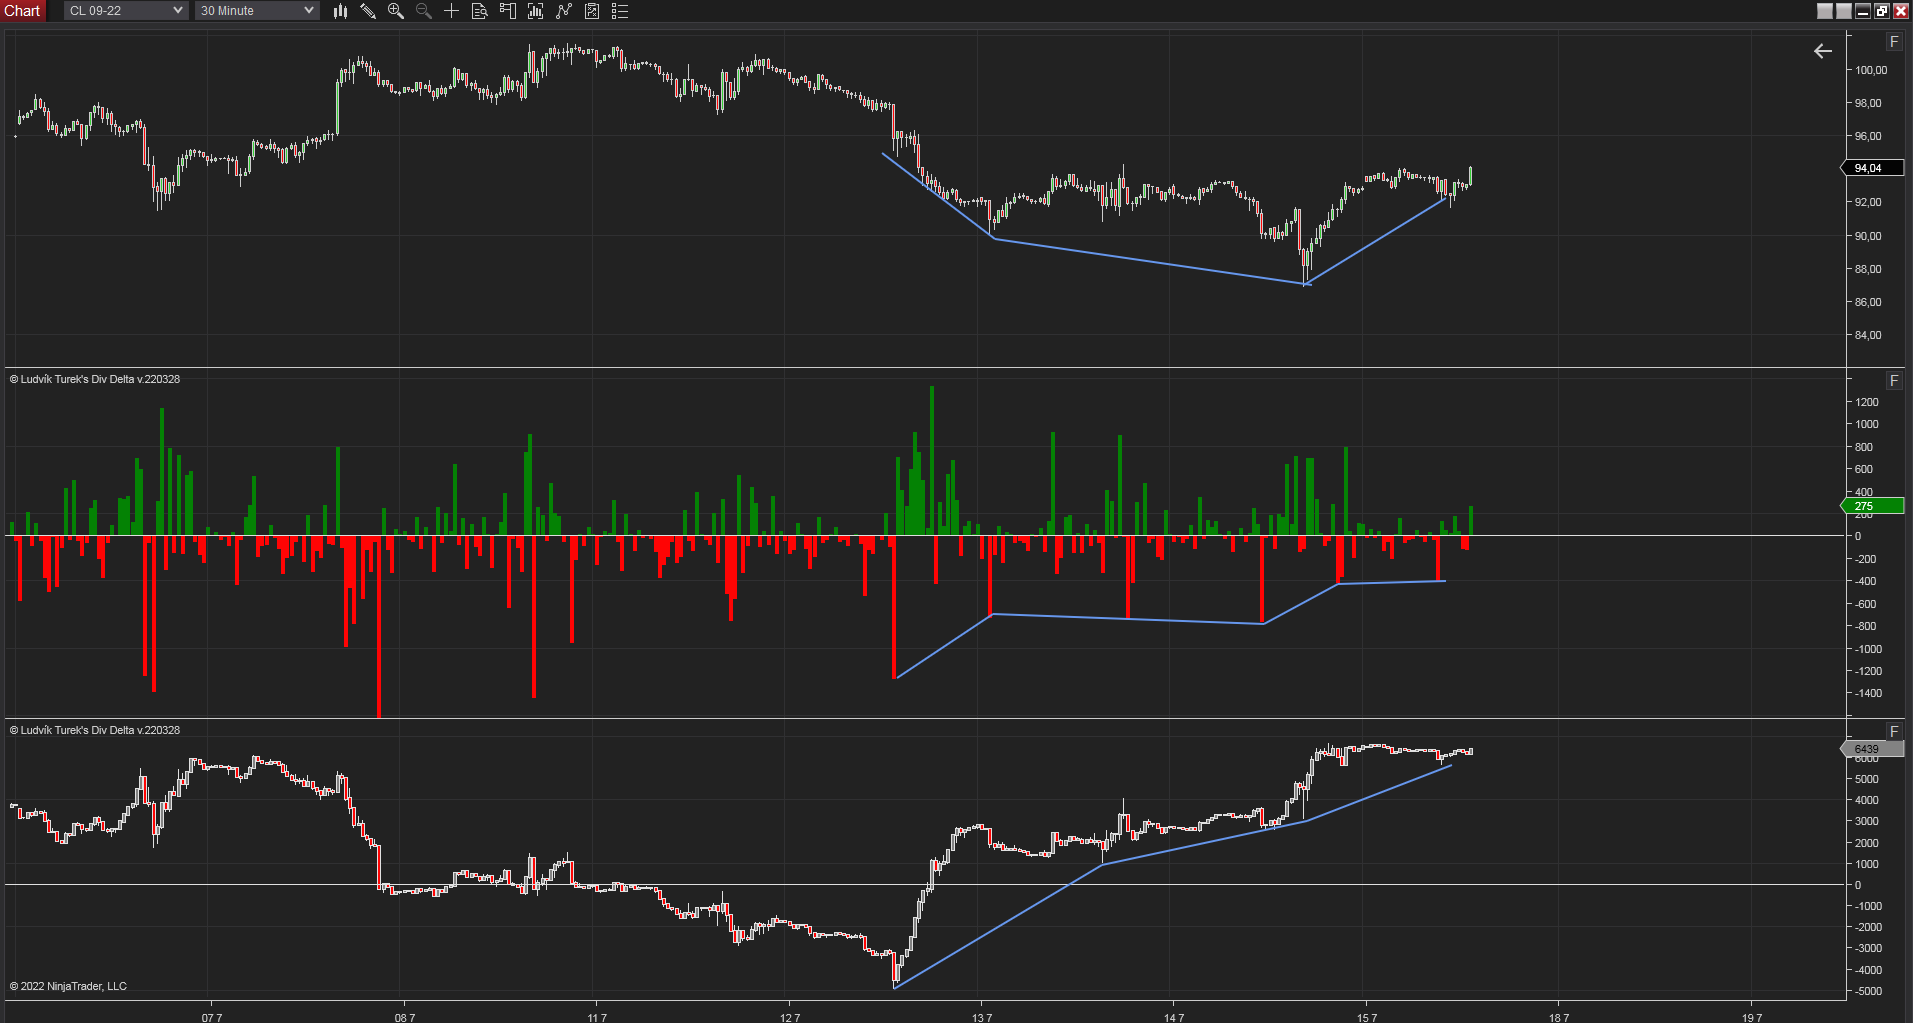 30 minutes chart of CL, Divergence delta in Crude Oil. Source: Author's analysis